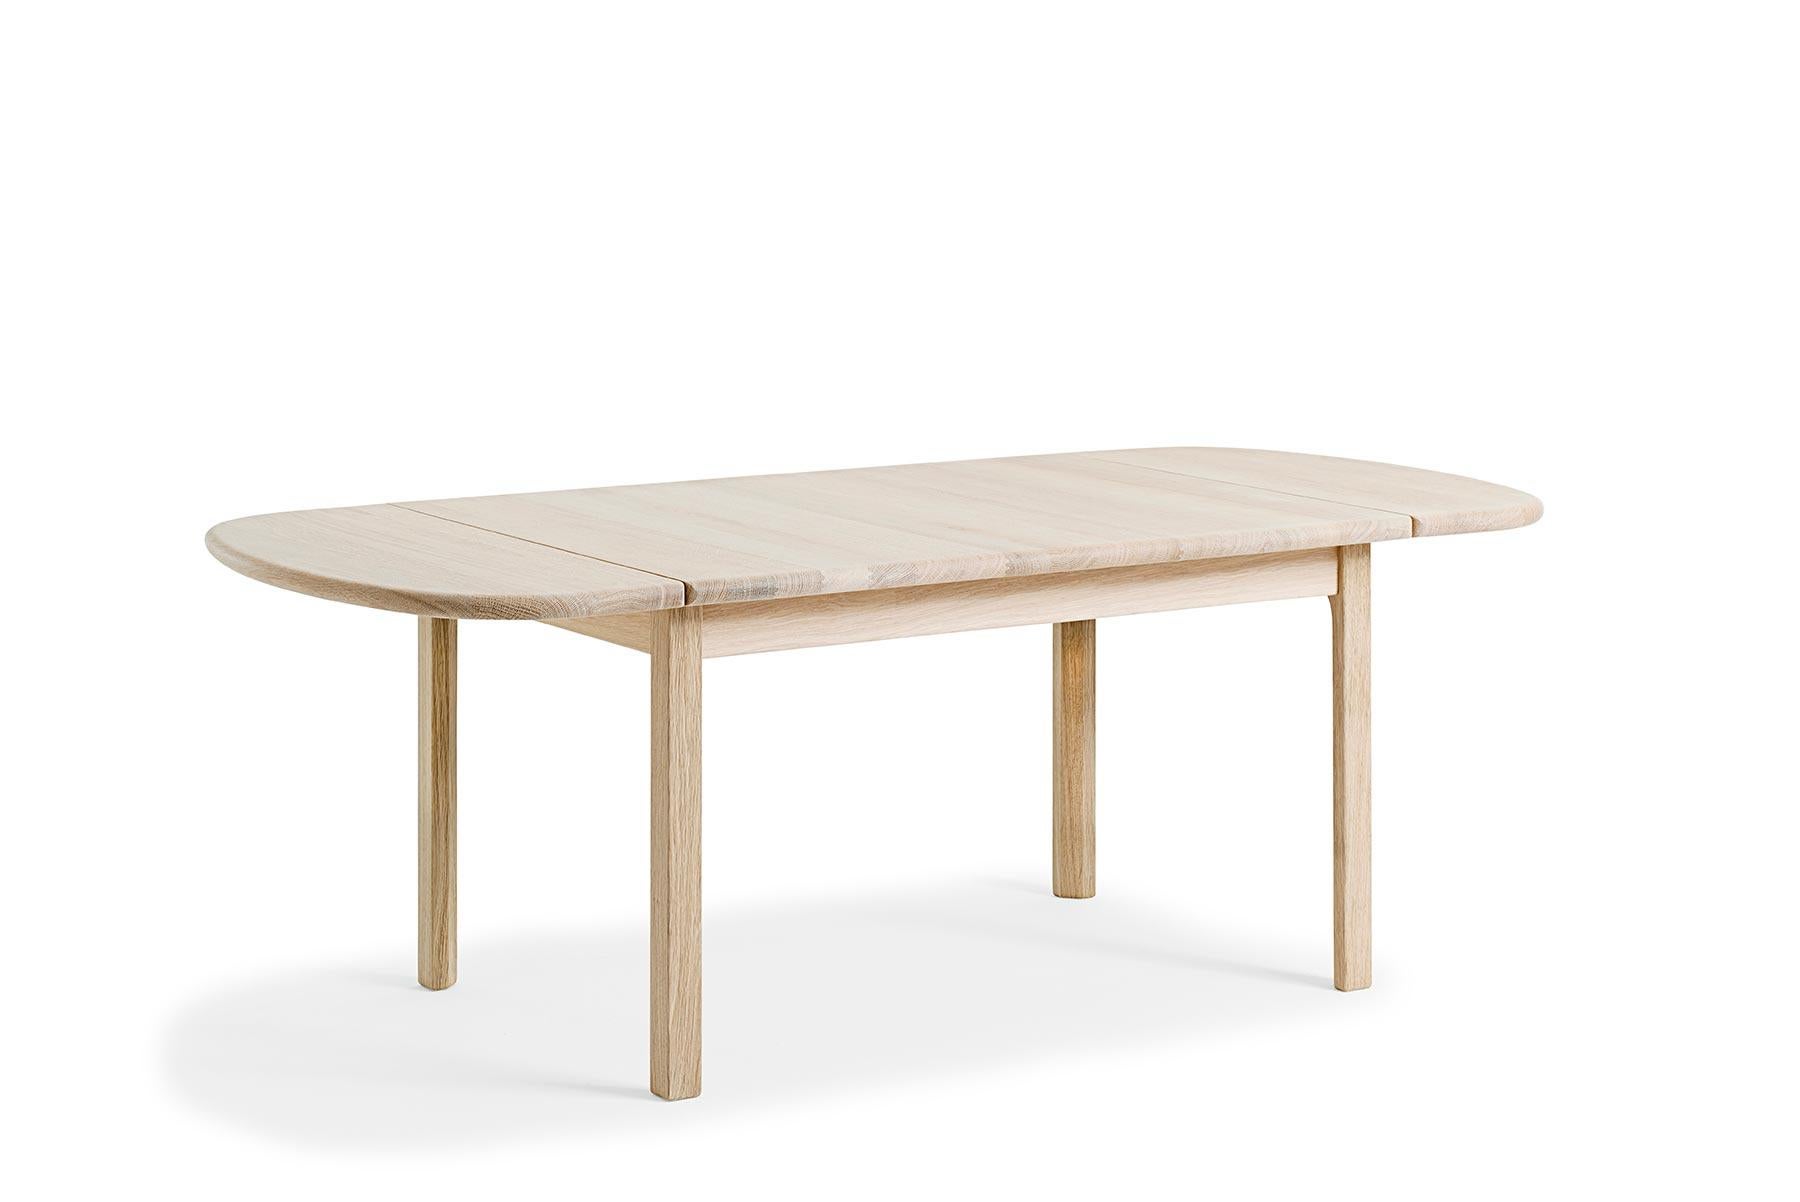 Hans Wegner GE, 82/85 Coffee Table, Stained Oak In Excellent Condition For Sale In Berkeley, CA